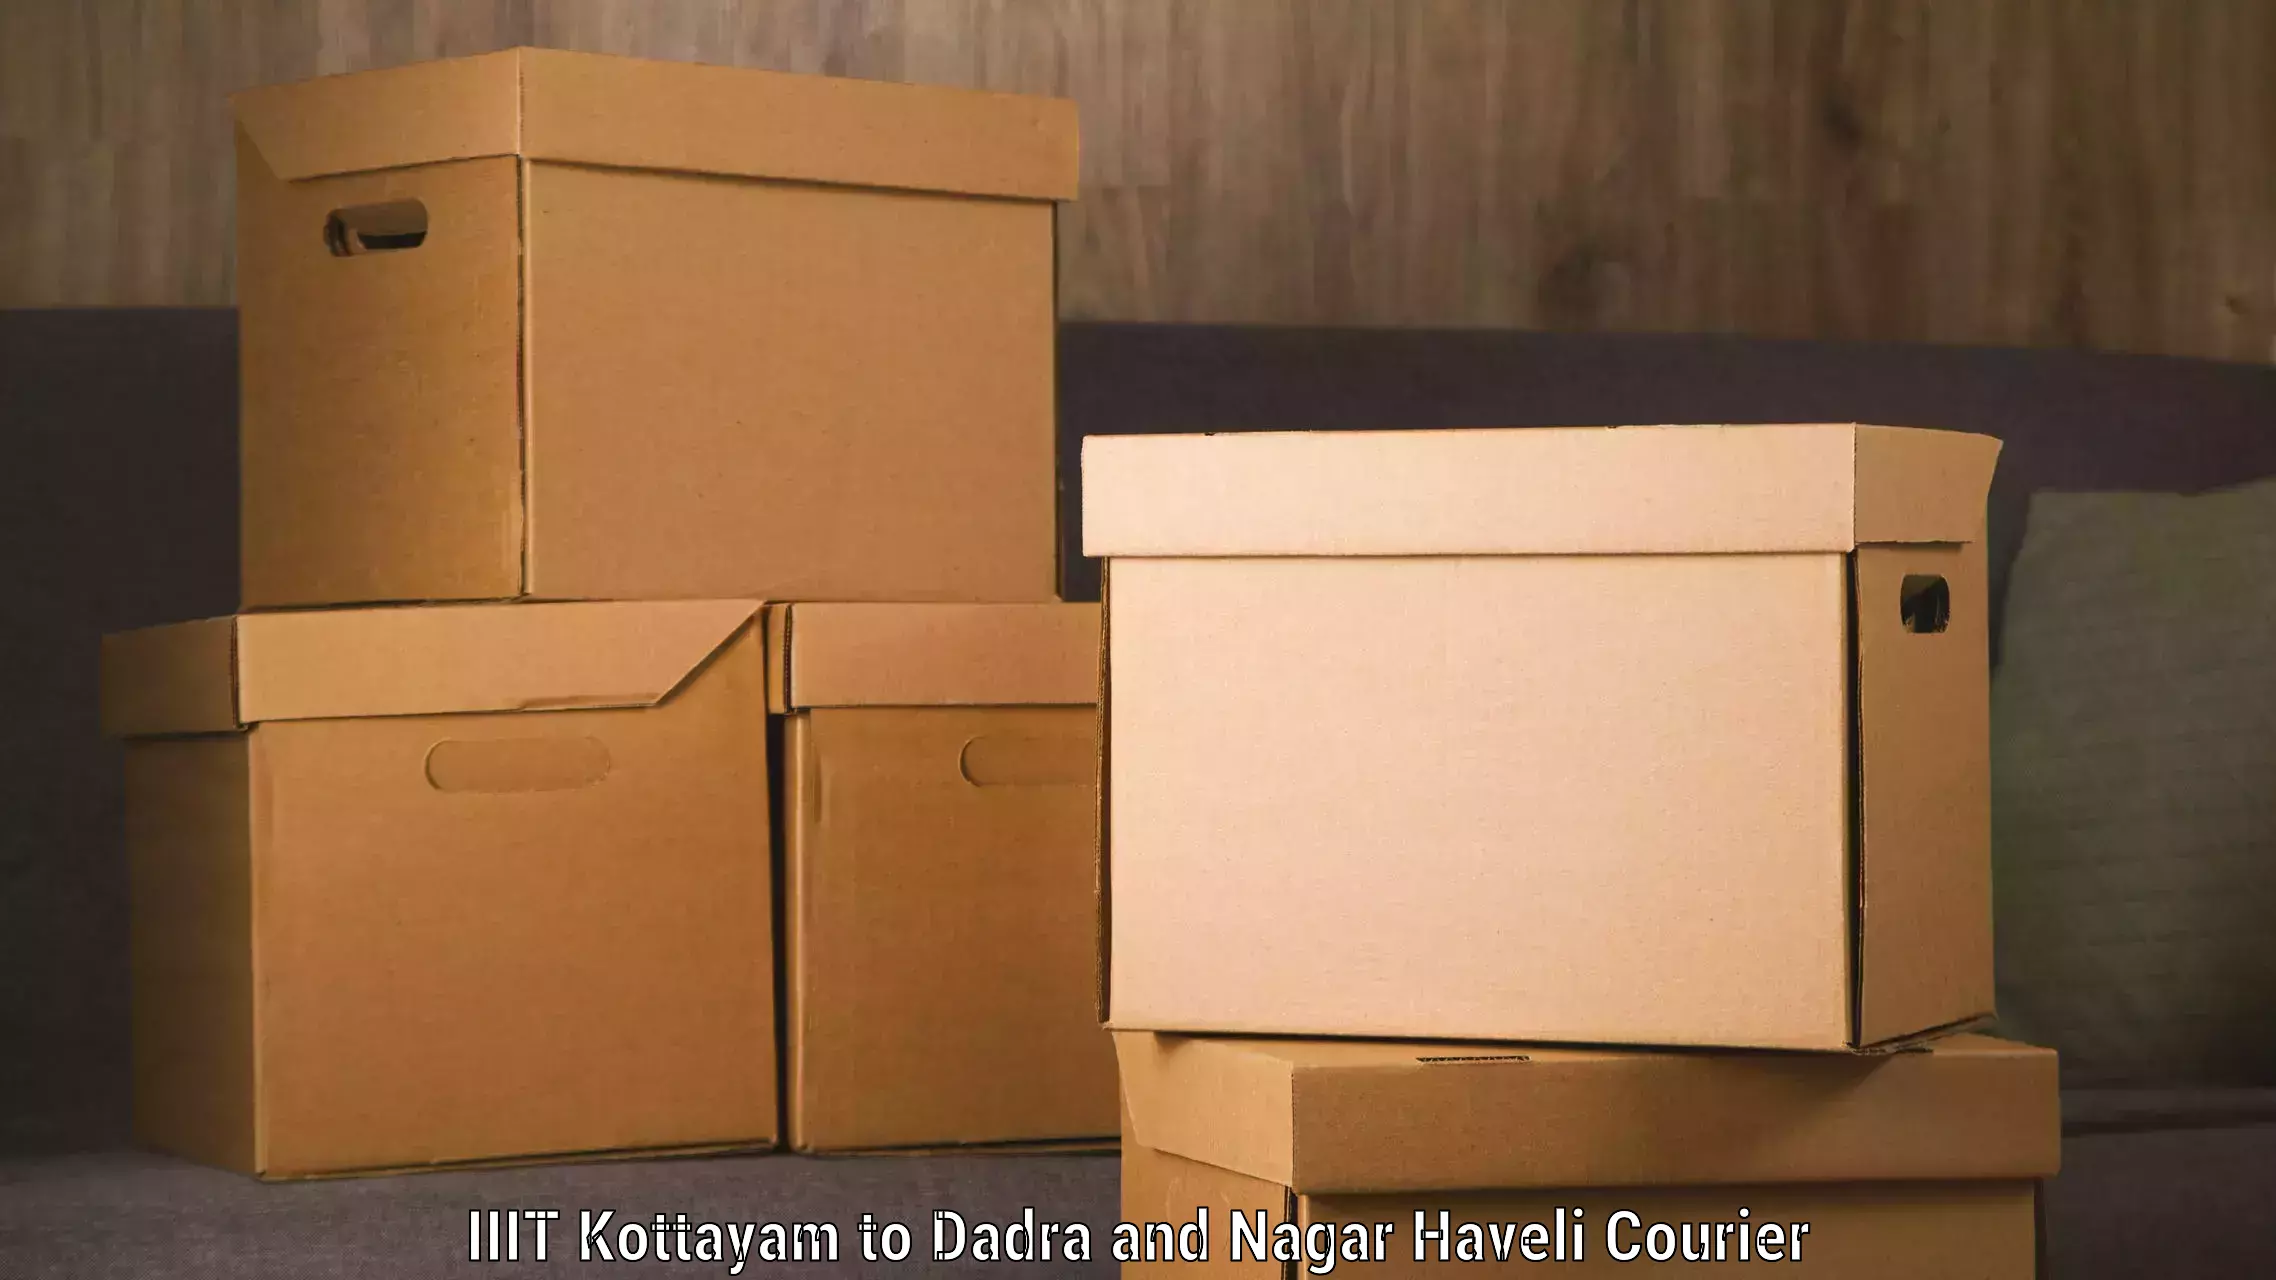 State-of-the-art courier technology IIIT Kottayam to Dadra and Nagar Haveli